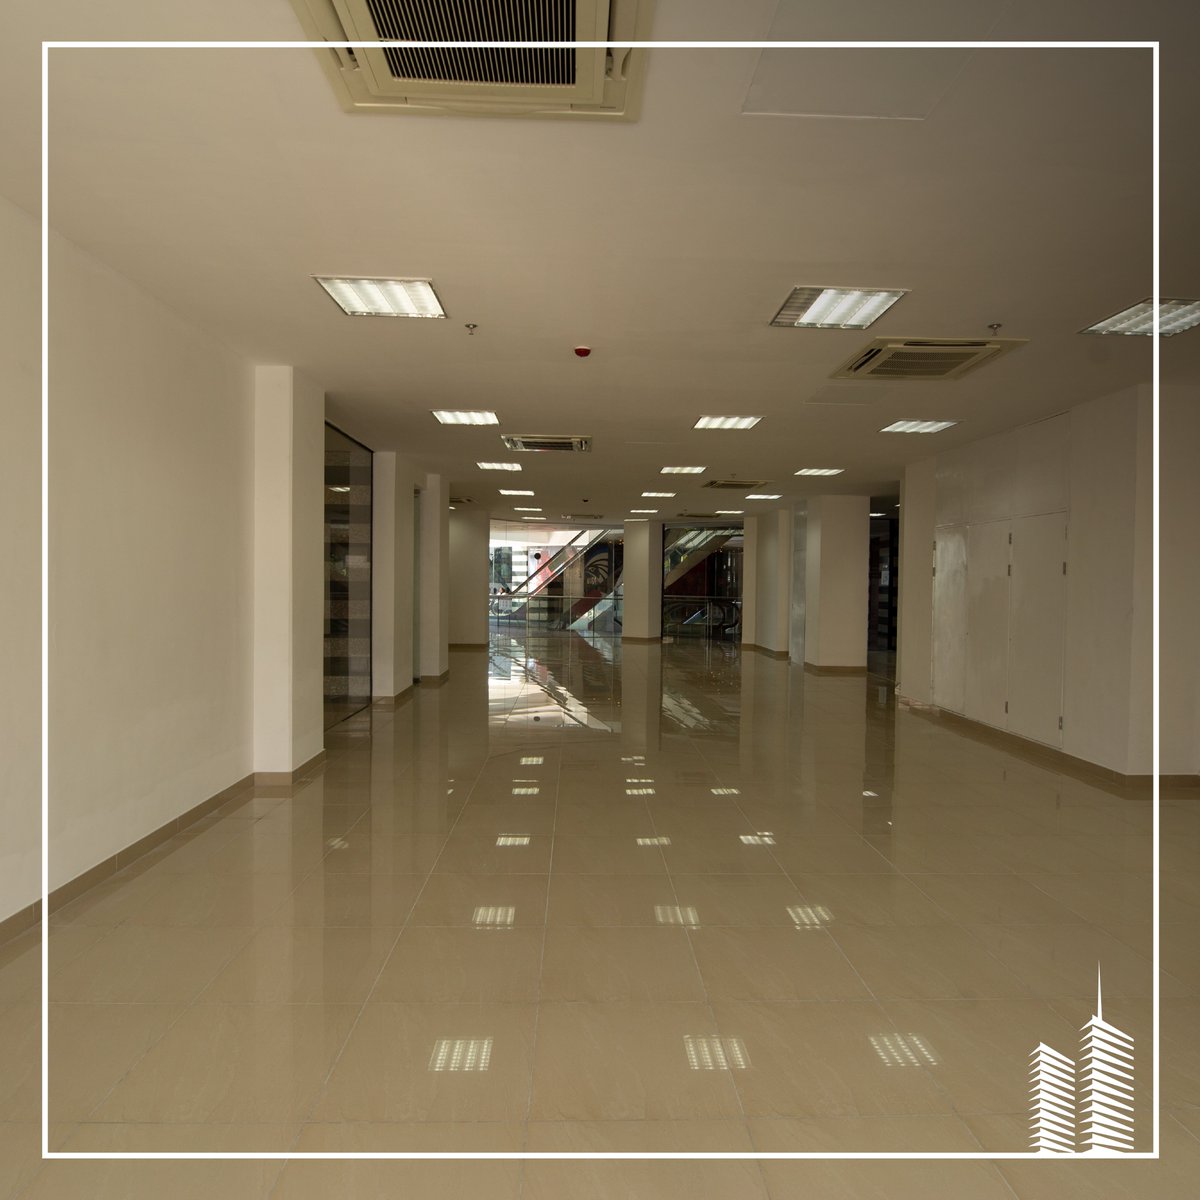 Elevate your work environment with our stylish and functional office spaces.
#vivatowers #commercial #officespace #officespaces #building #shopspaces #daressalaam #landmark #security